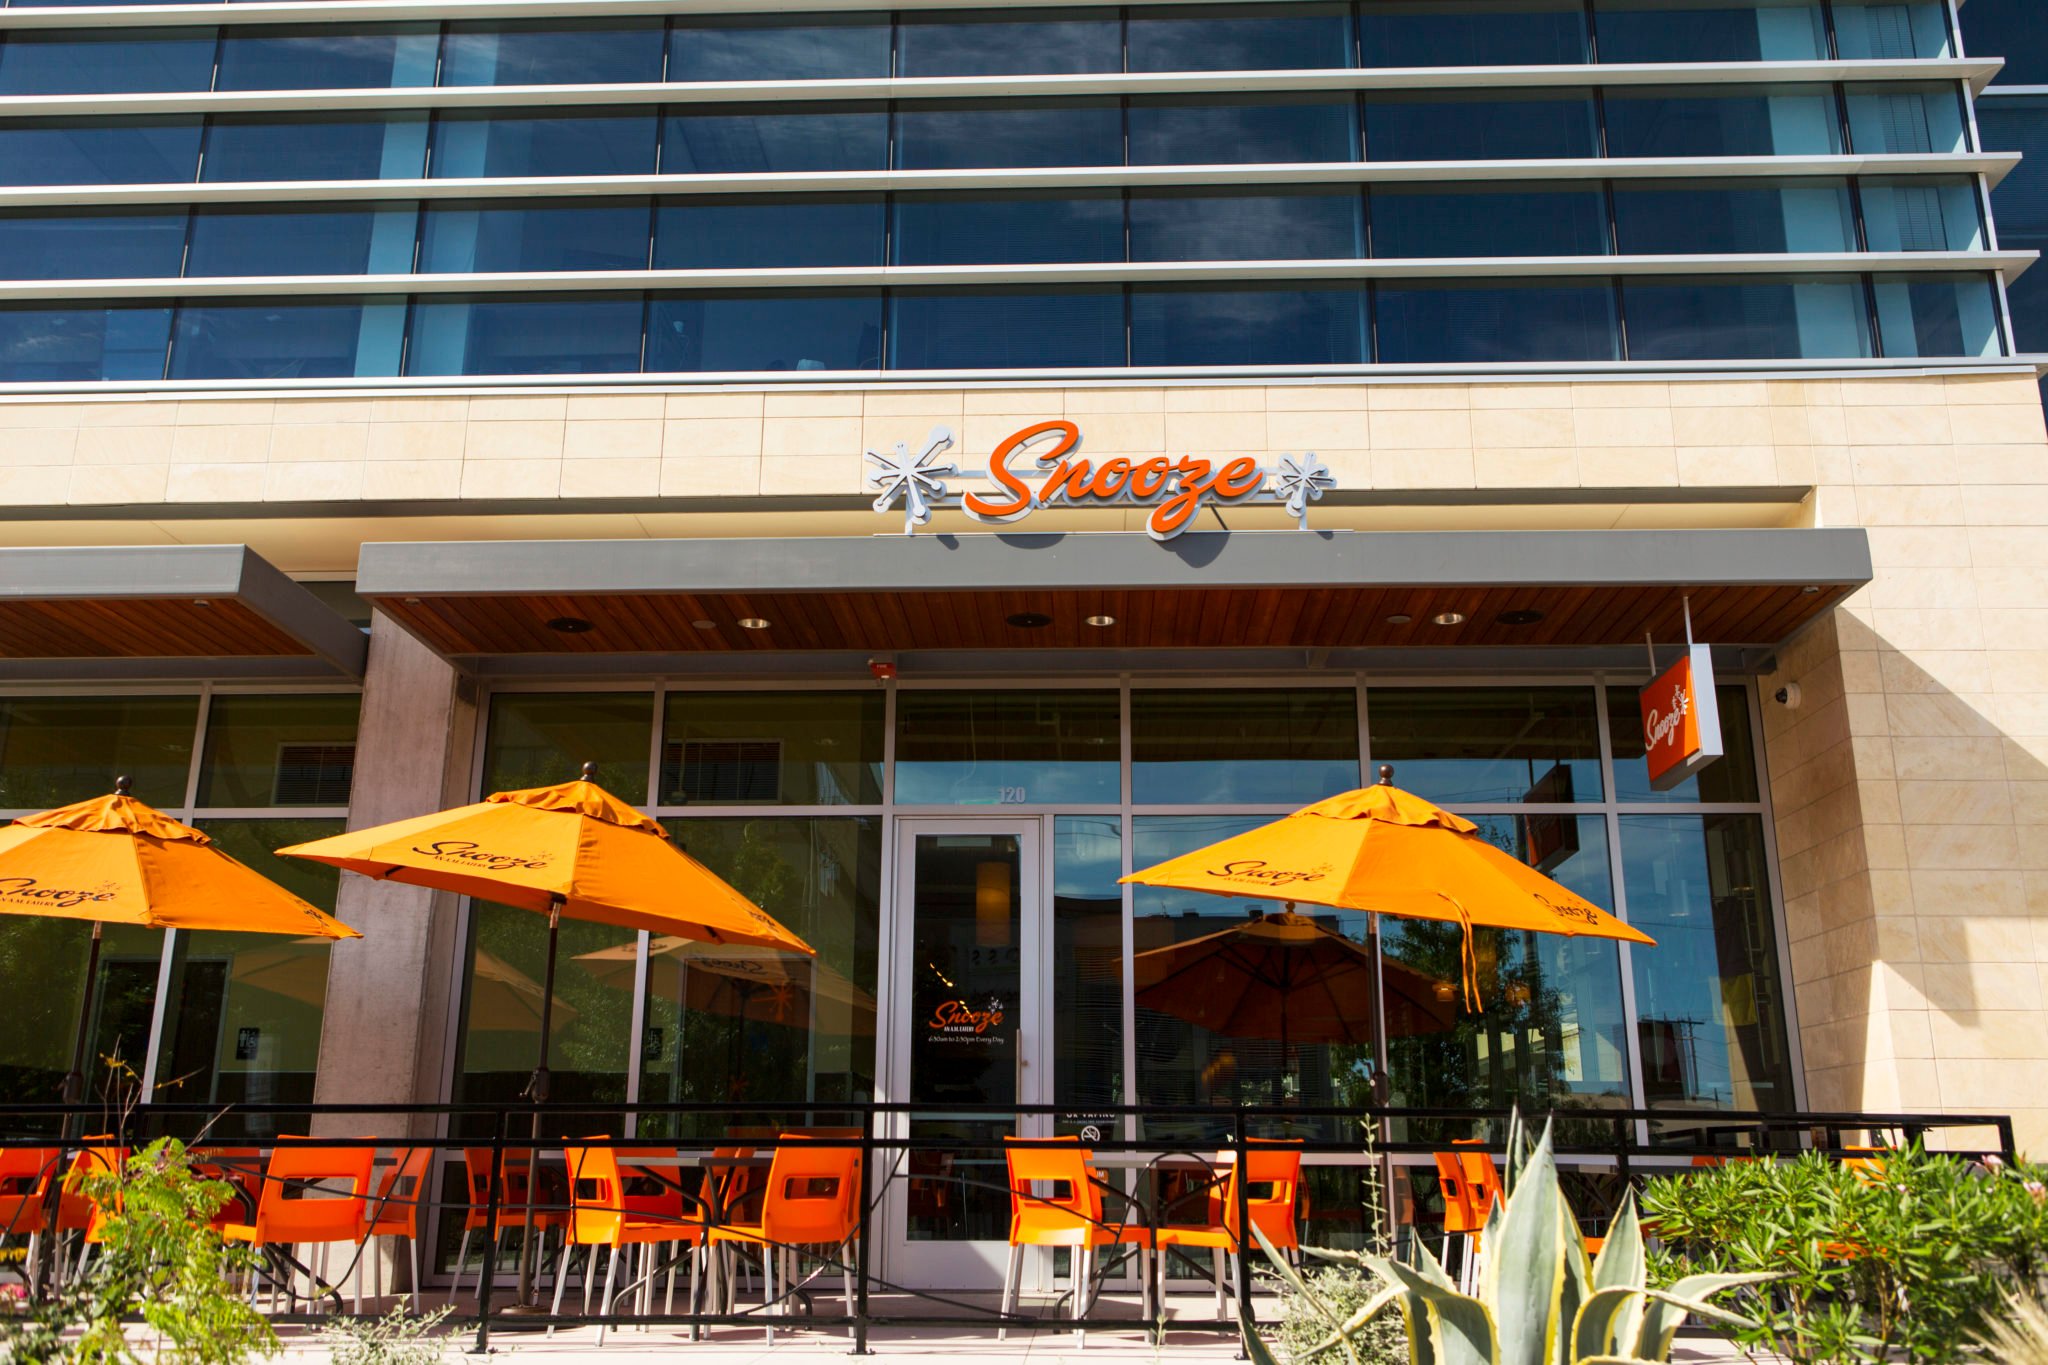 An Exterior Photo Of The Snooze Restaurant & Patio In North Lamar Showing The Snooze Sign